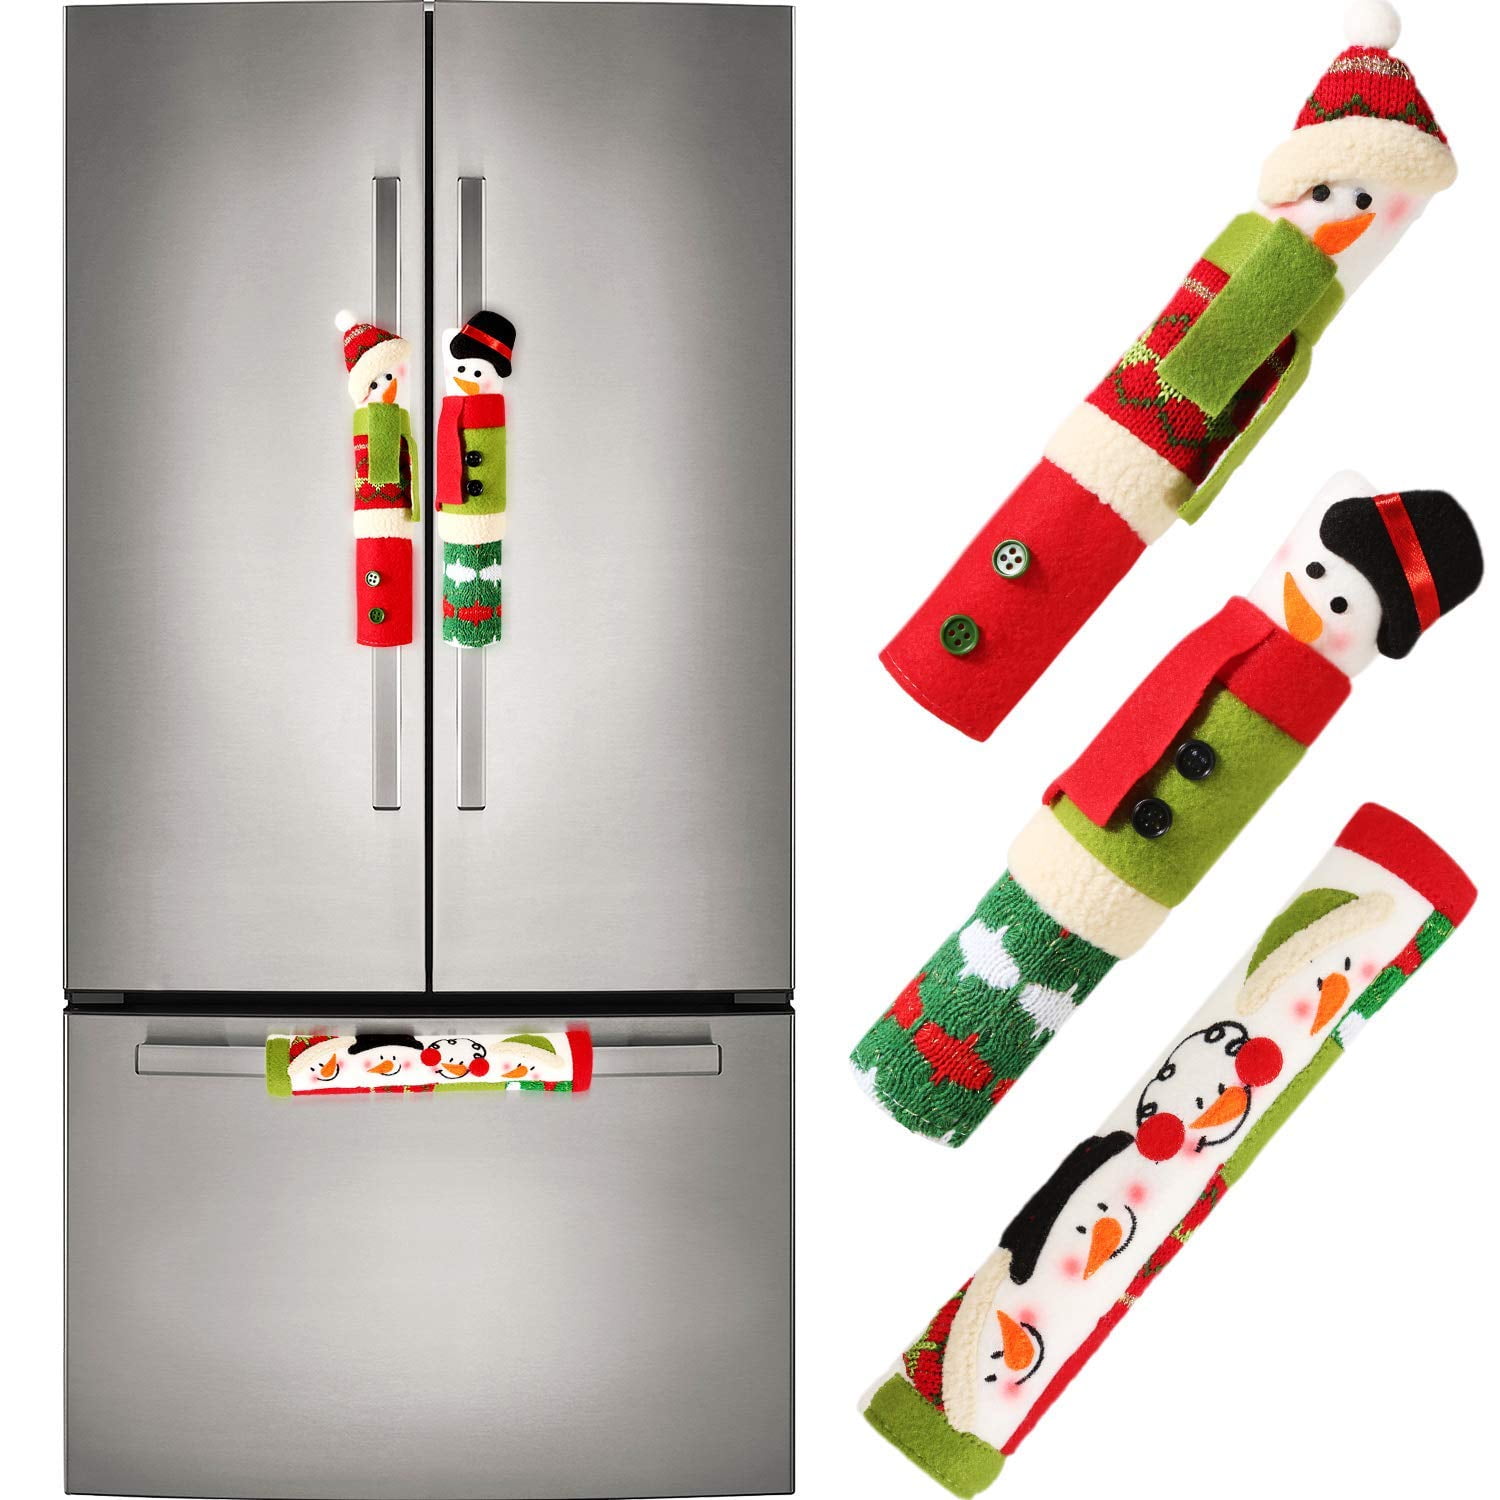 Sheskind Snowman Kitchen Appliance Handle Covers Christmas Handle Protector 3 Packs with Gift Snowman Welcome Ornament for Holiday Season Decoration 